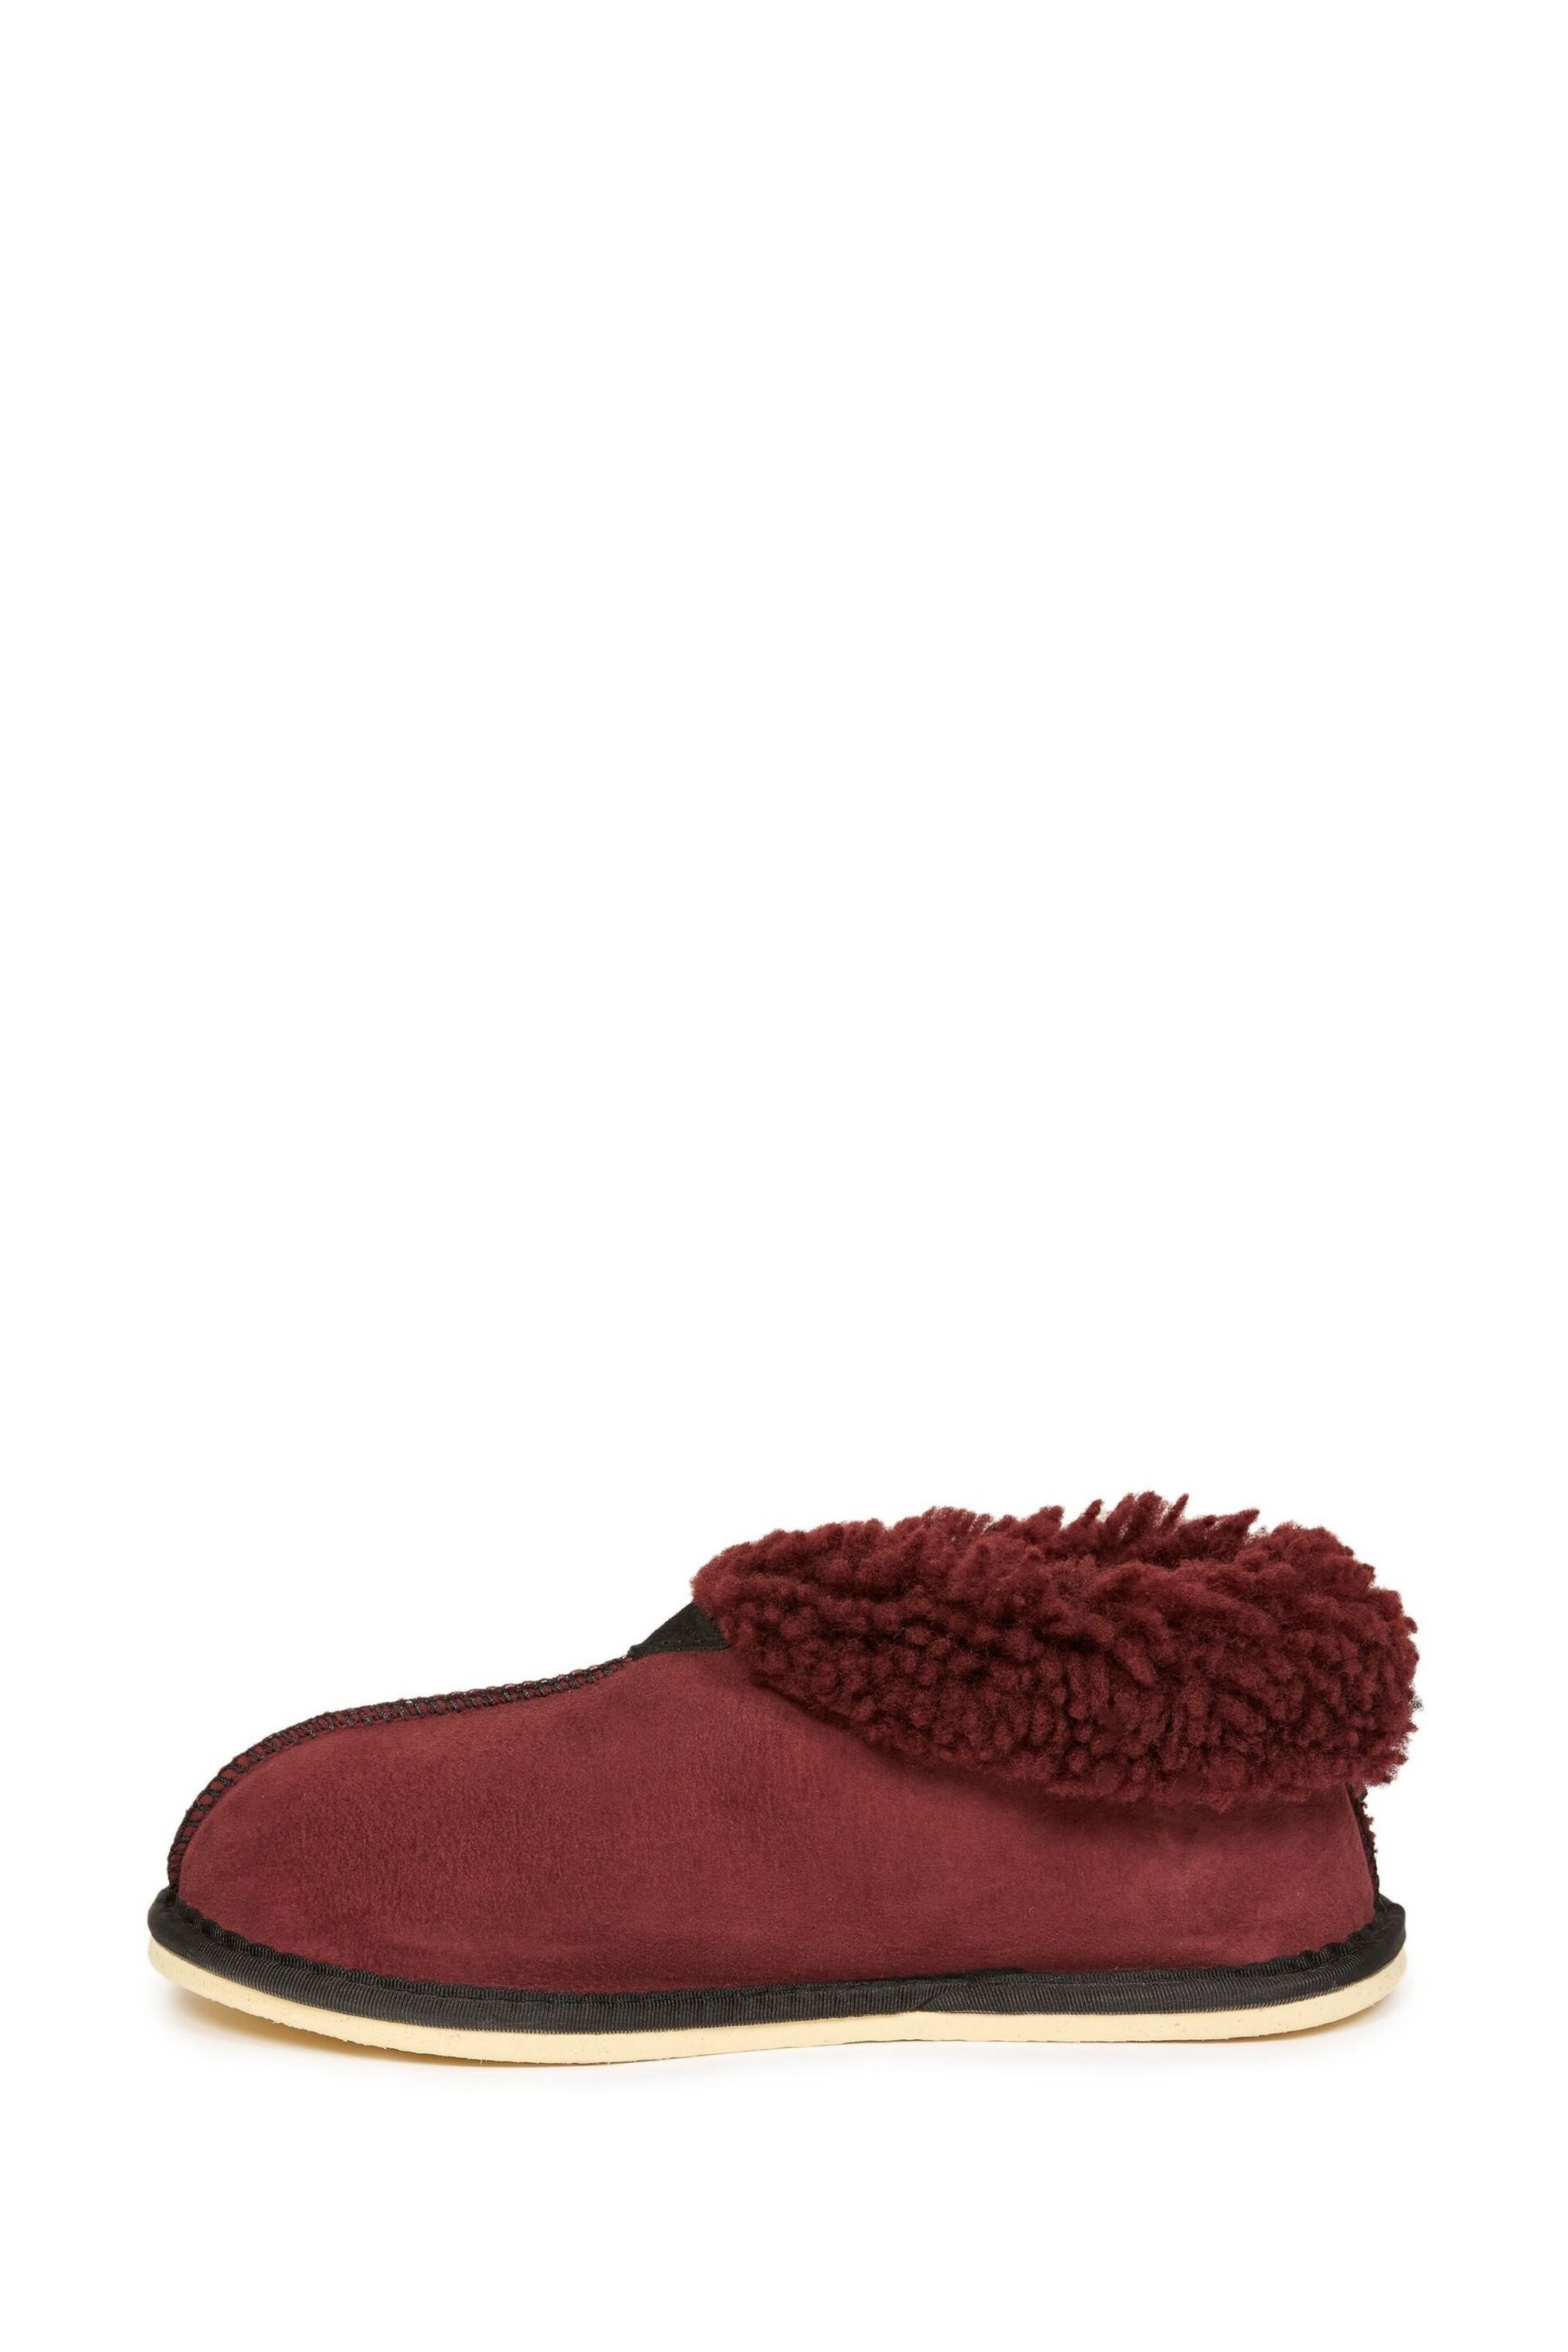 Celtic & Co. Ladies Sheepskin Bootee Slippers - Image 2 of 4